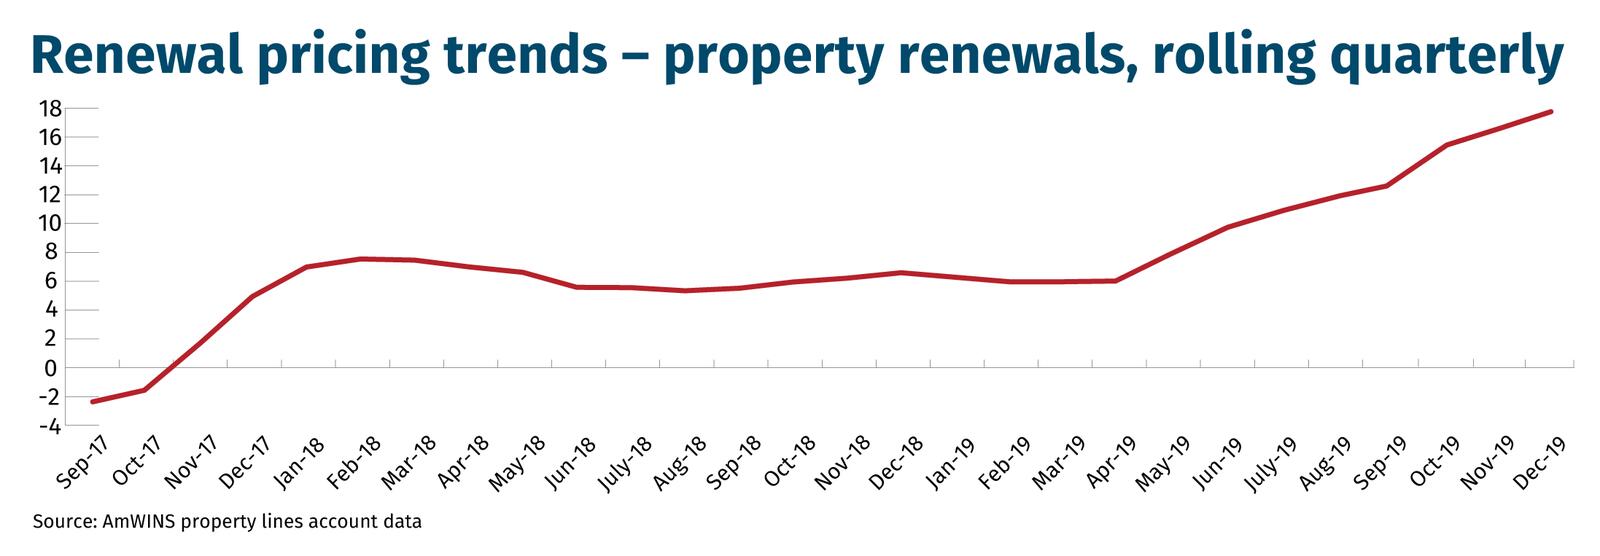 Renewal pricing trends – property renewals, rolling quarterly